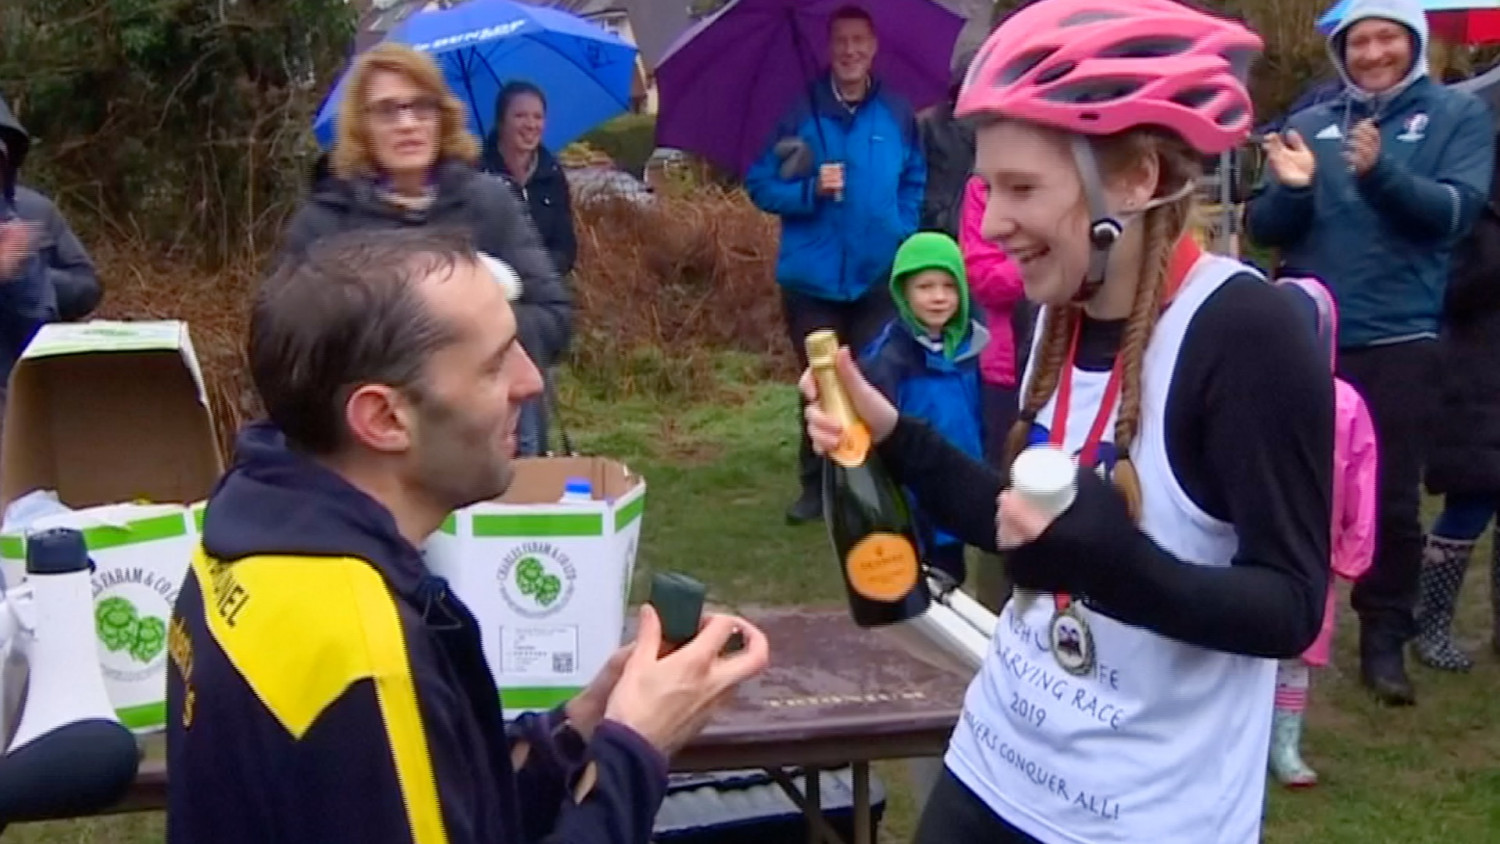 ‘Wife Carrying’ Race Winner Proposes to Partner After Gruelling Victory